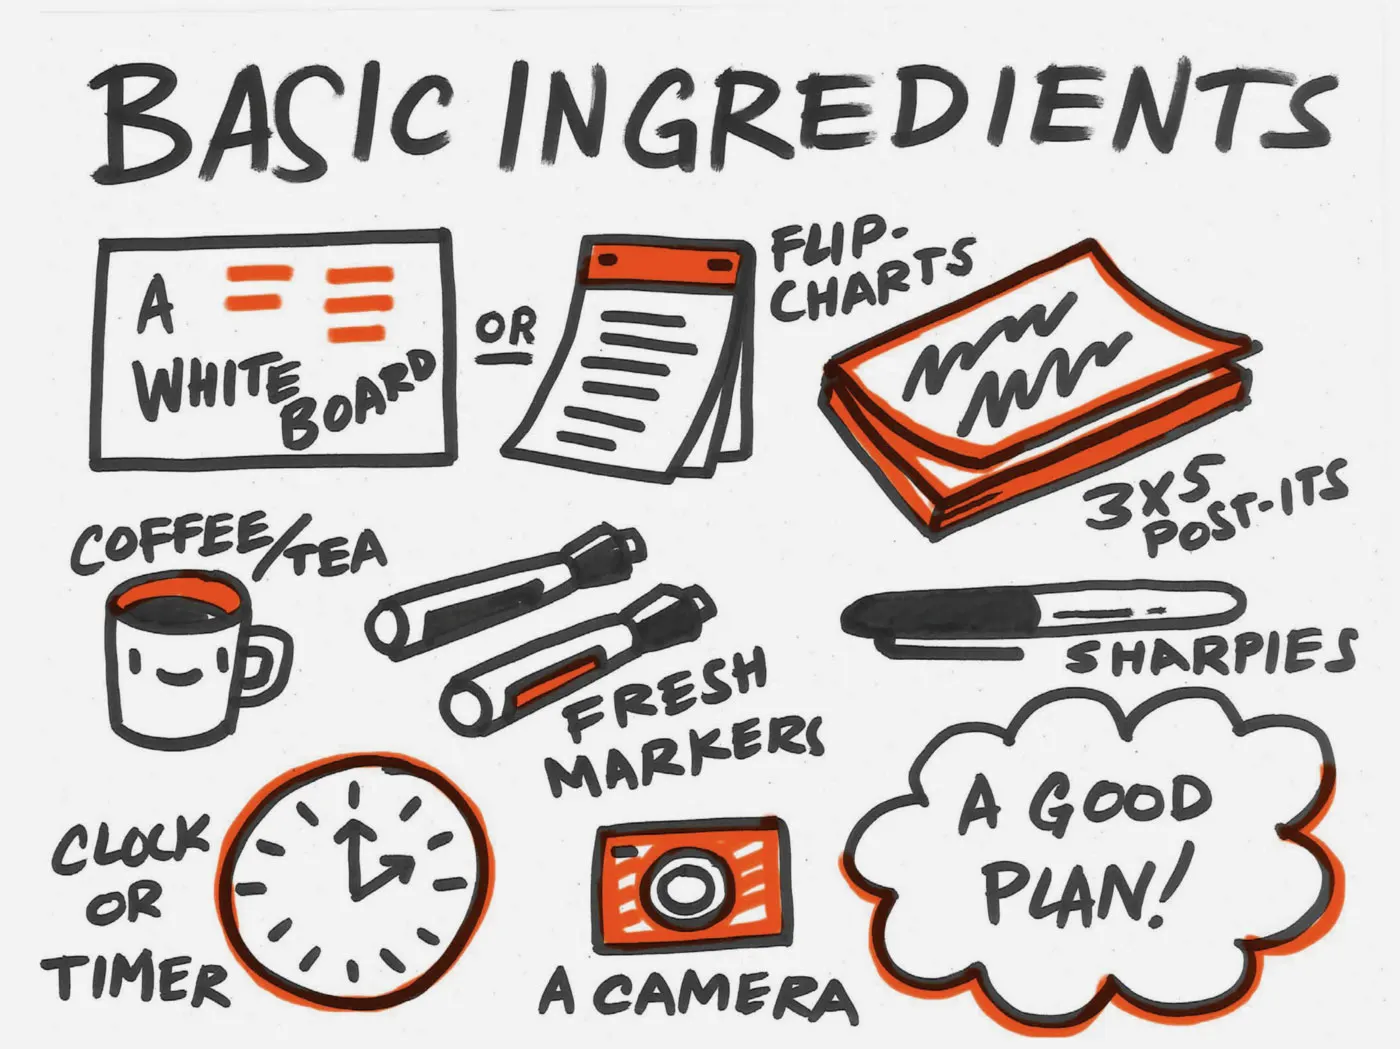 Black marker sketch with the heading "Basic Ingredients" and drawing/word pairings of a whiteboard, coffee/tea, flip charts, 3 x 5 sticky notes, fresh markers, permanent markers, clock or timer, a camera, a good plan. 